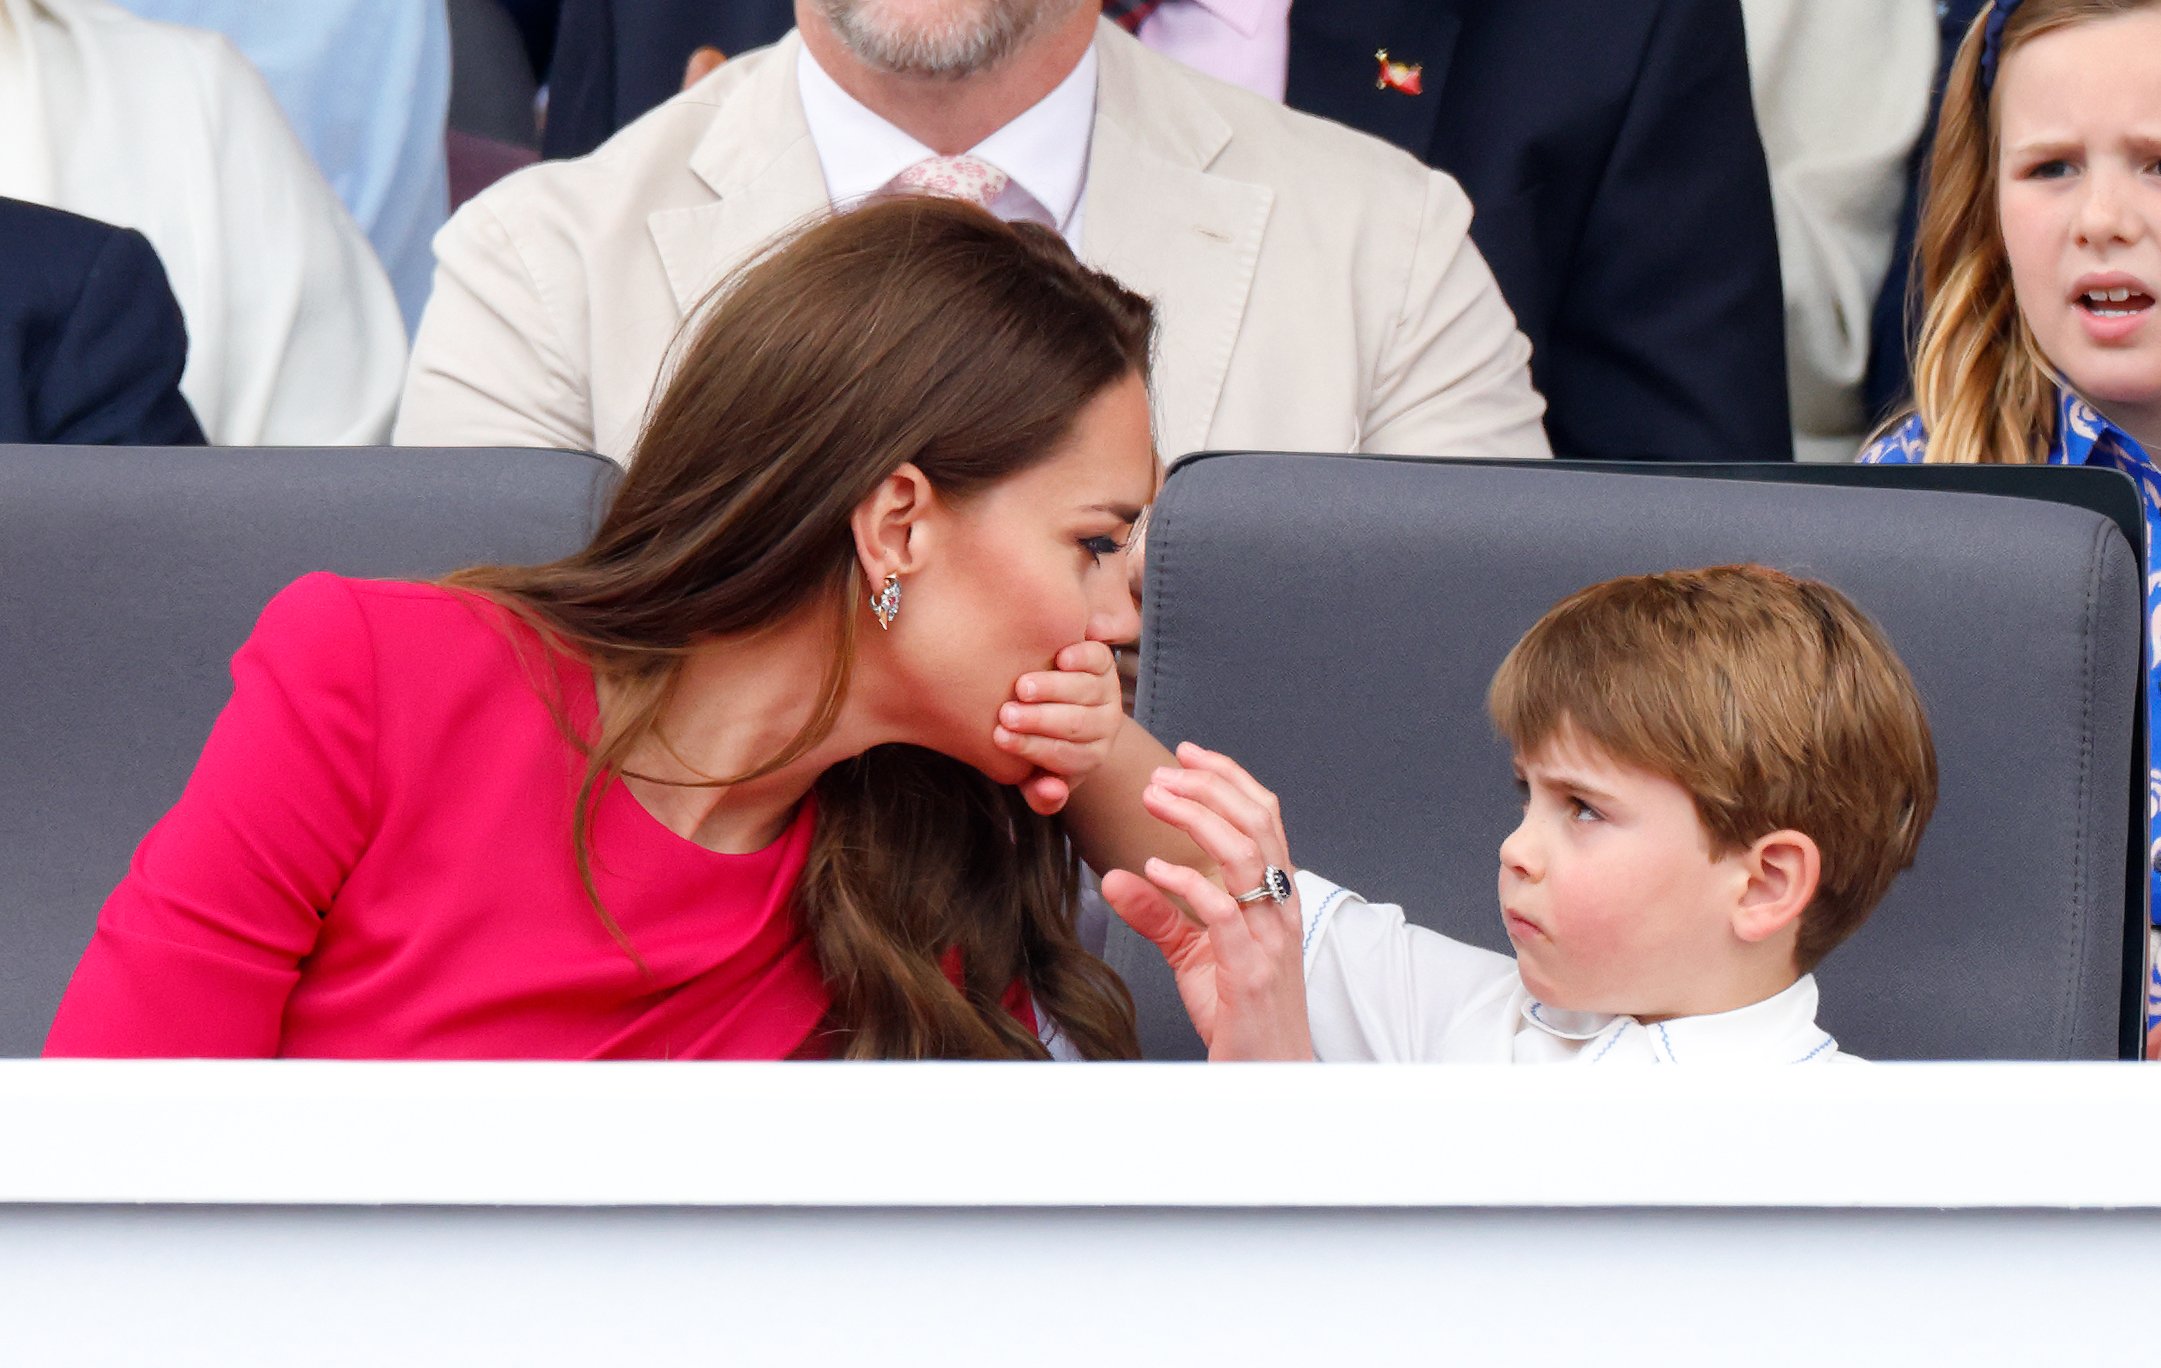 Prince Louis covers his mother Kate Middleton's mouth with his hand